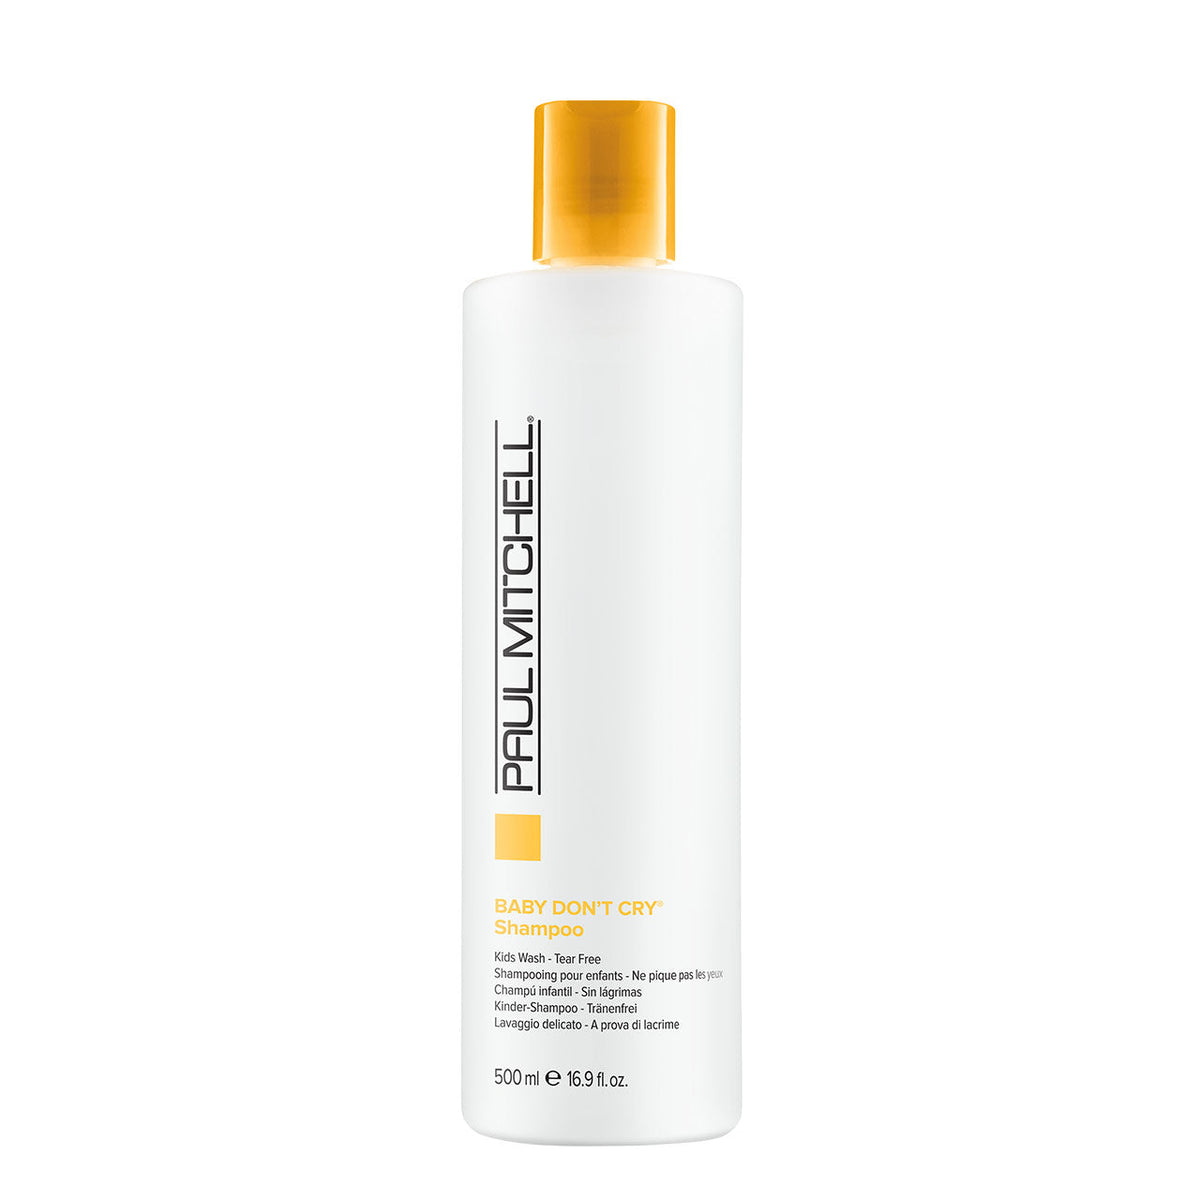 Baby Don't Cry Shampoo - 500ML - by Paul Mitchell |ProCare Outlet|